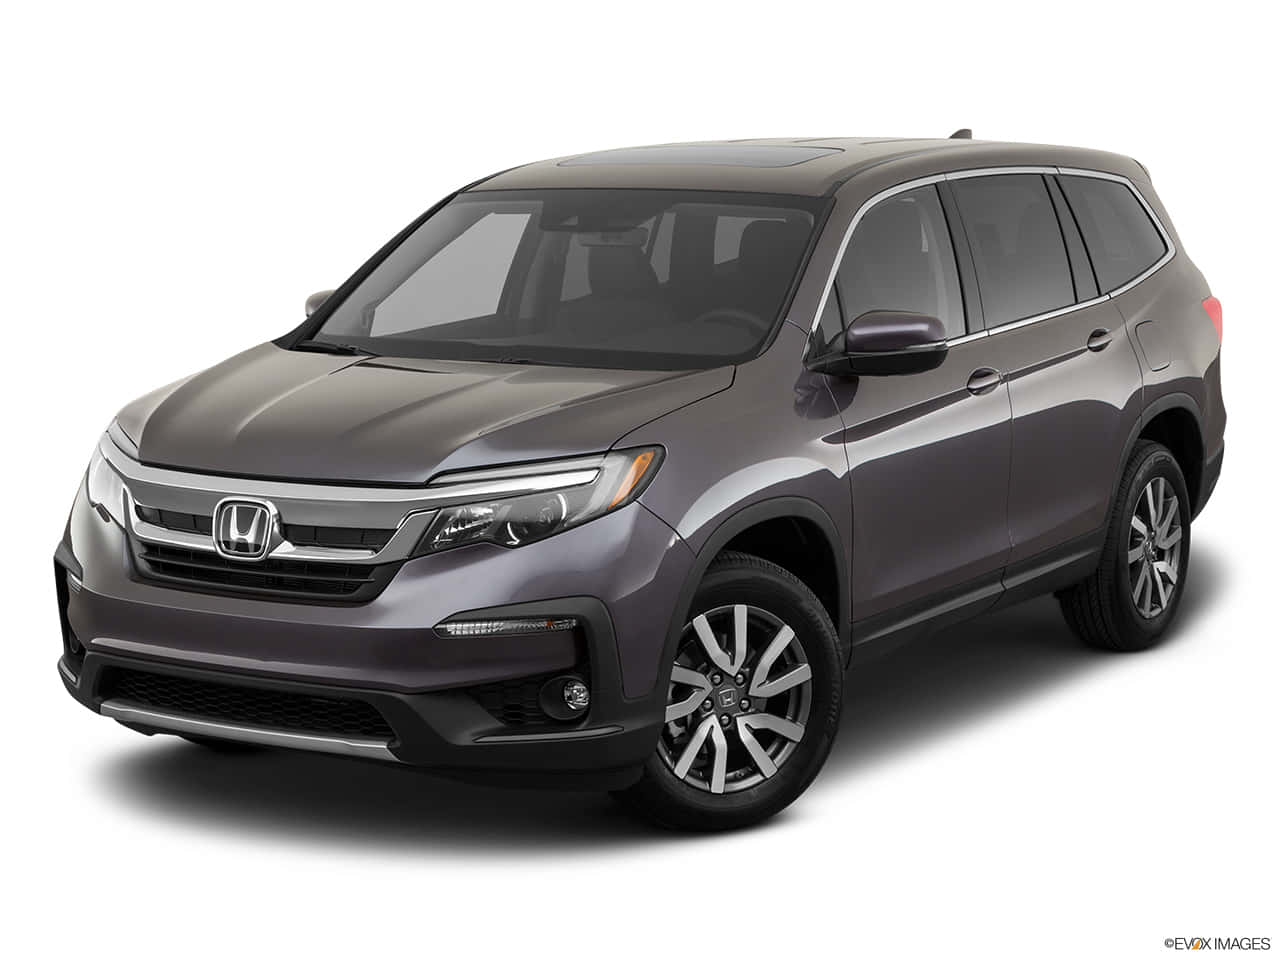 Cruise in Style in the Honda Pilot